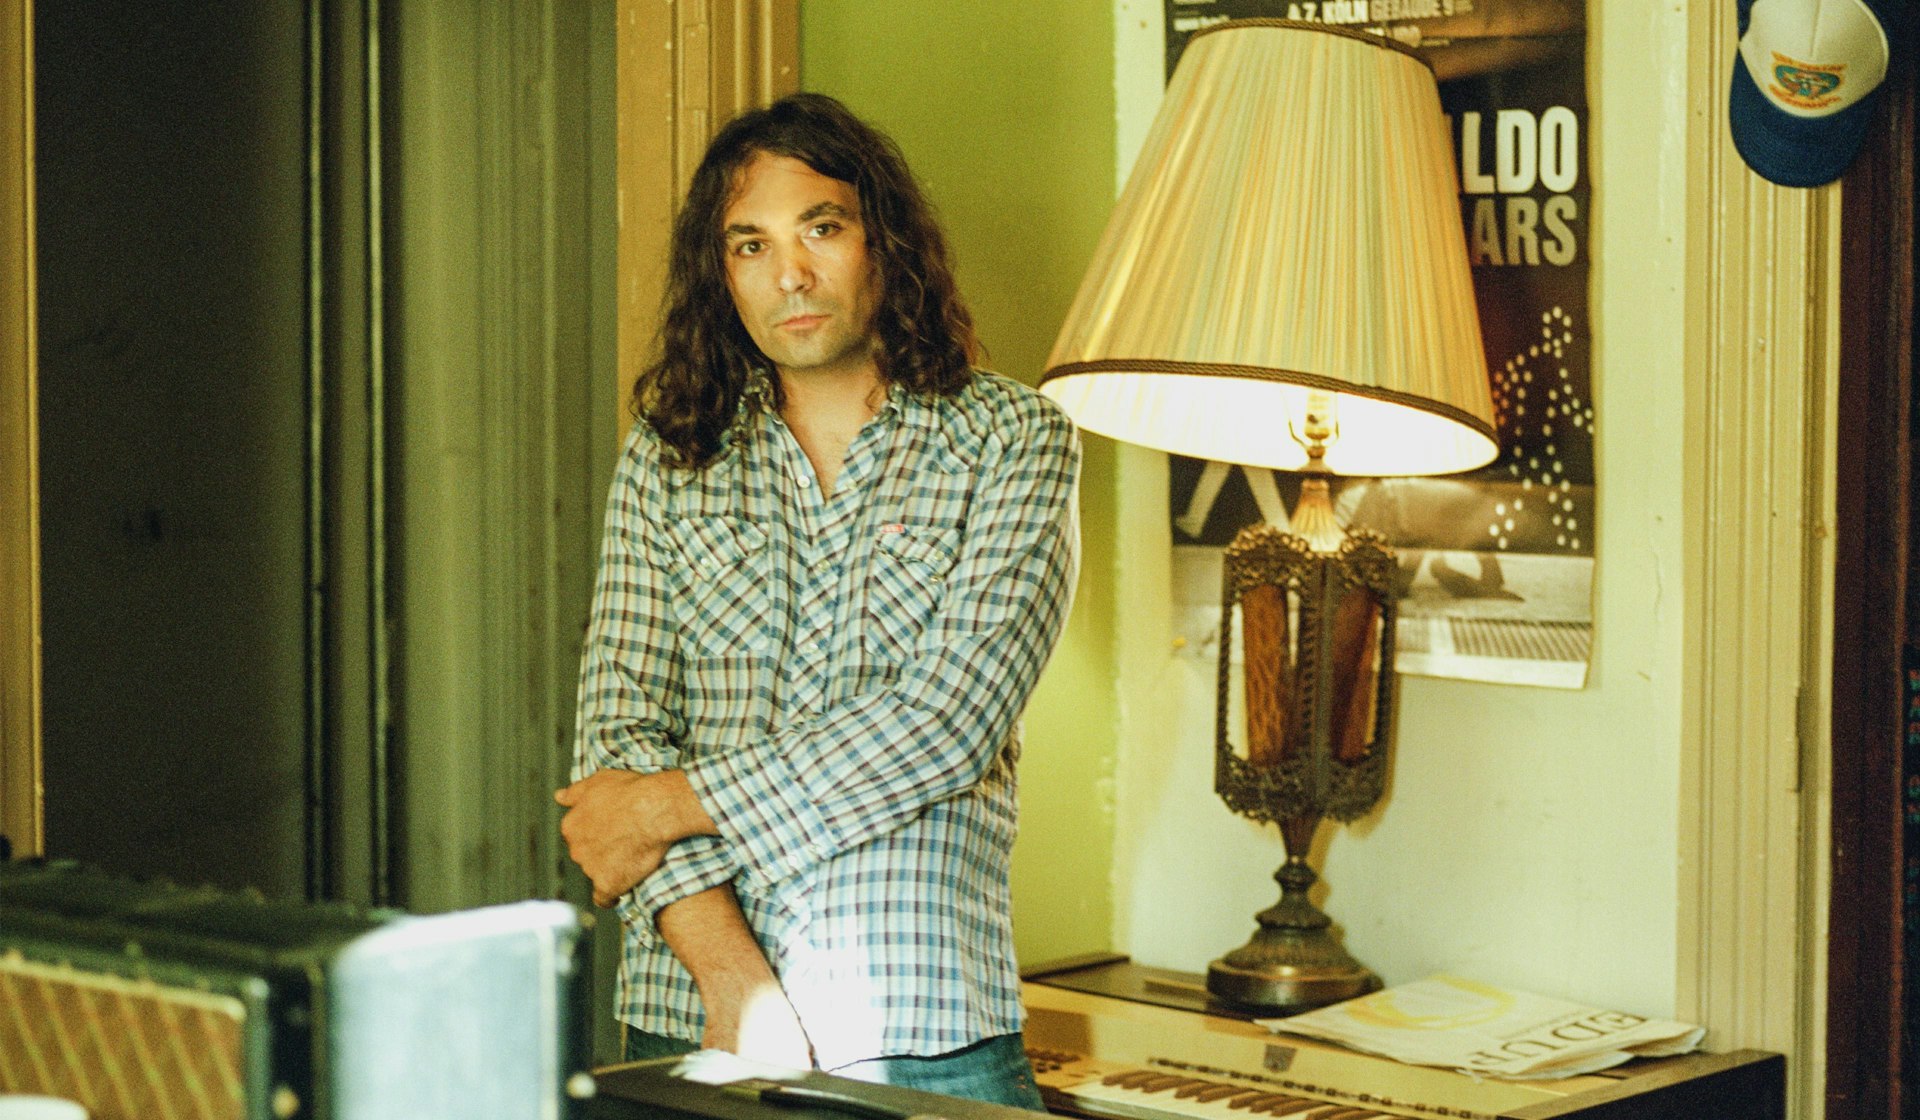 War on Drugs' Adam Granduciel defeated his inner demons to produce his best record yet